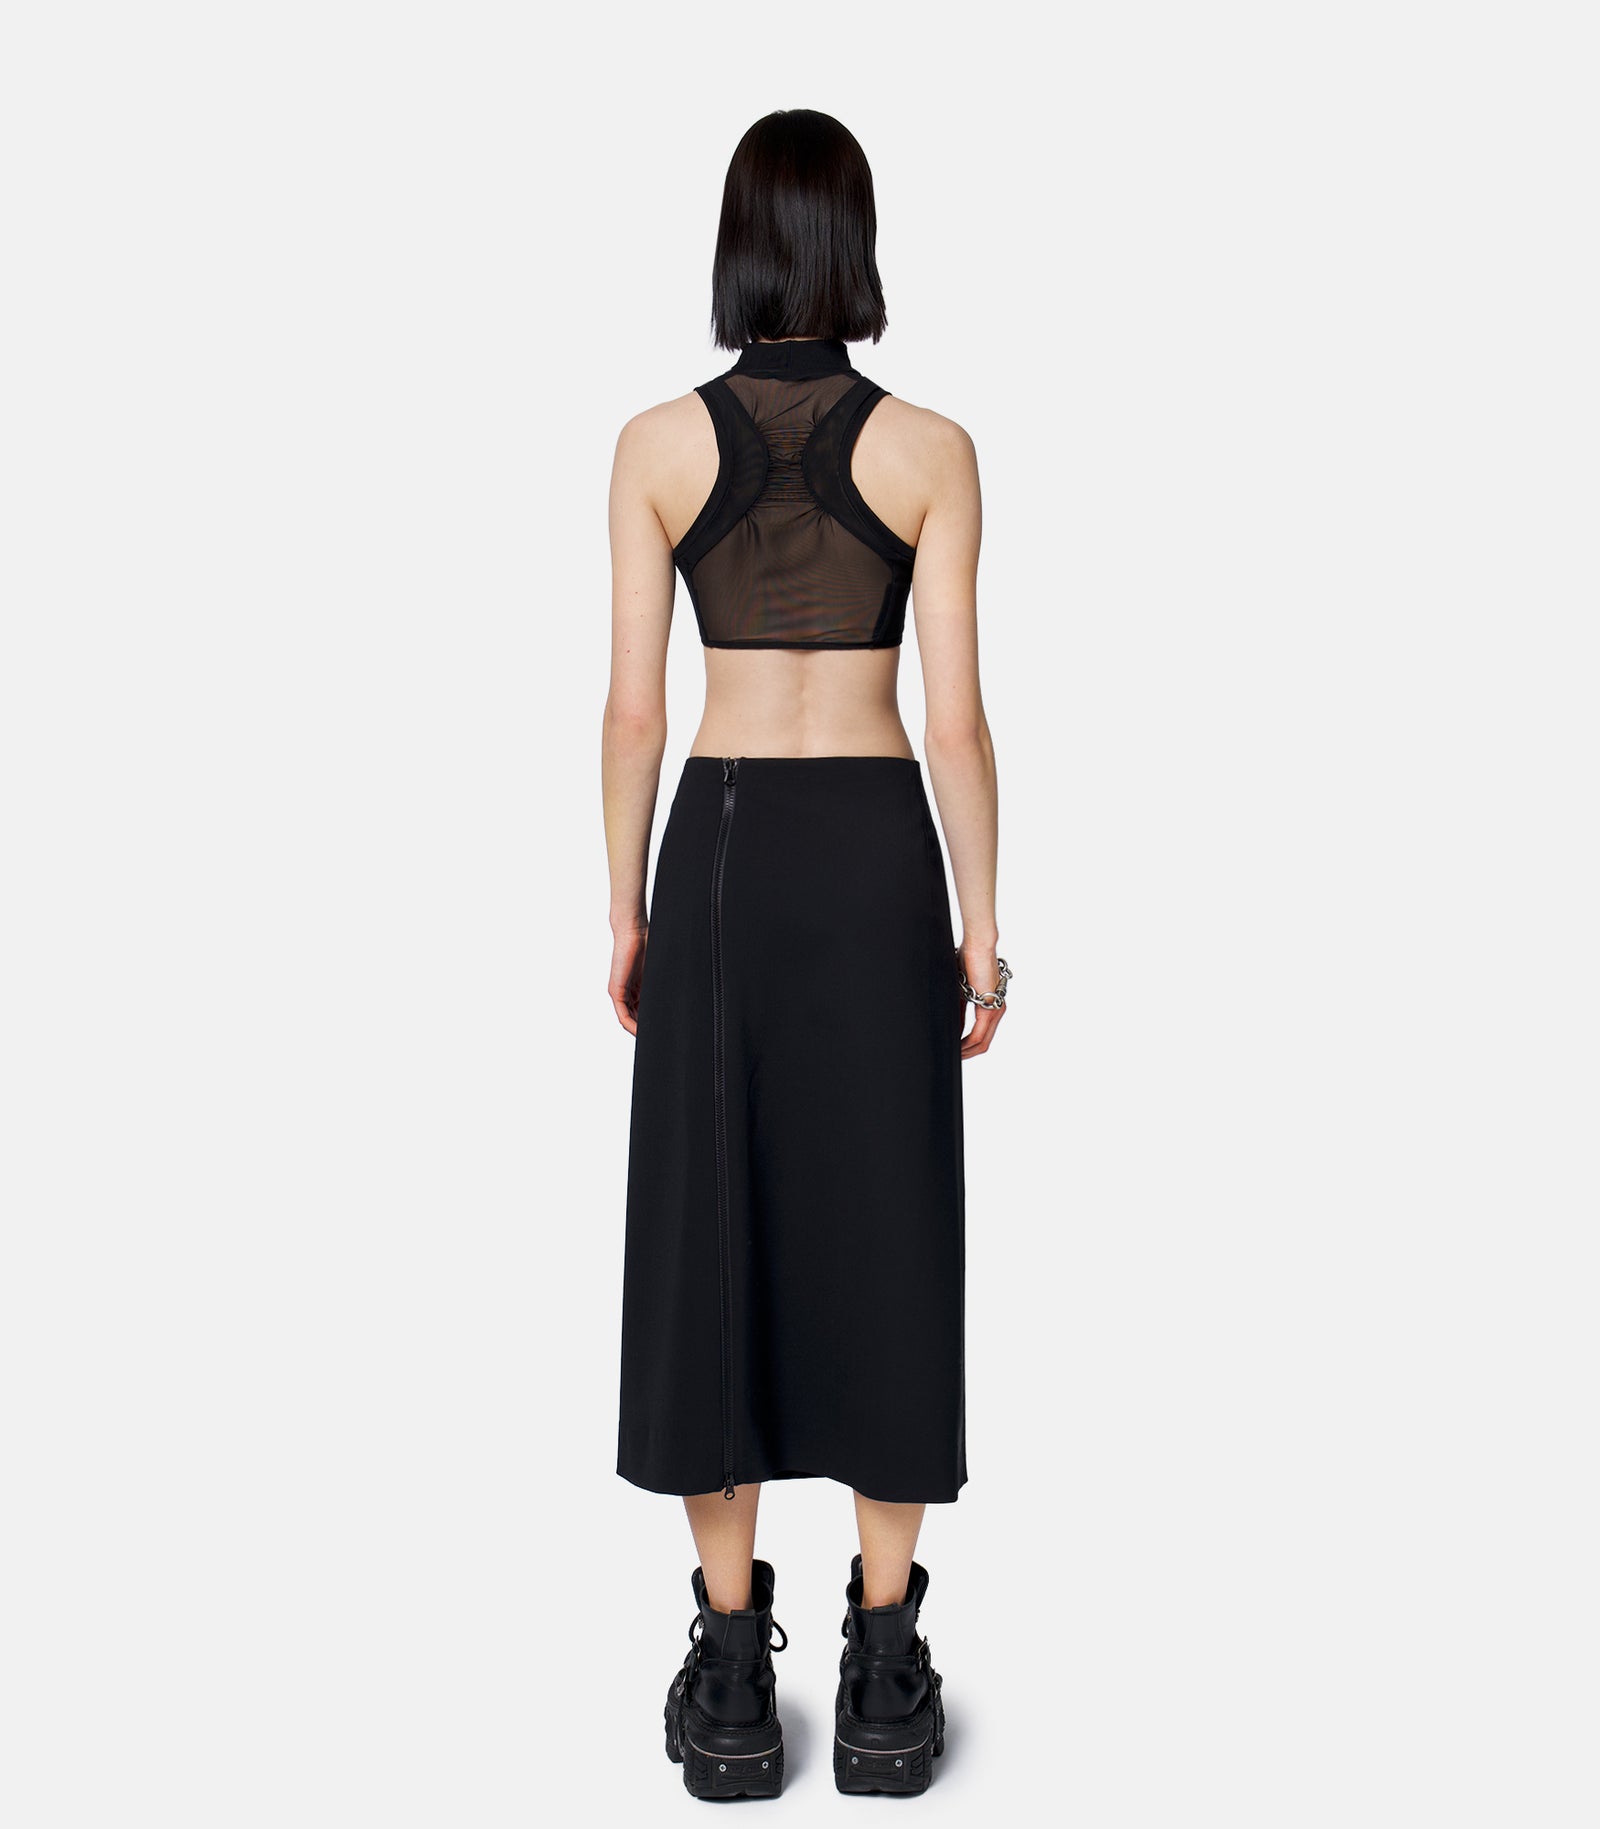 Reflective Barbed Wire Skirt